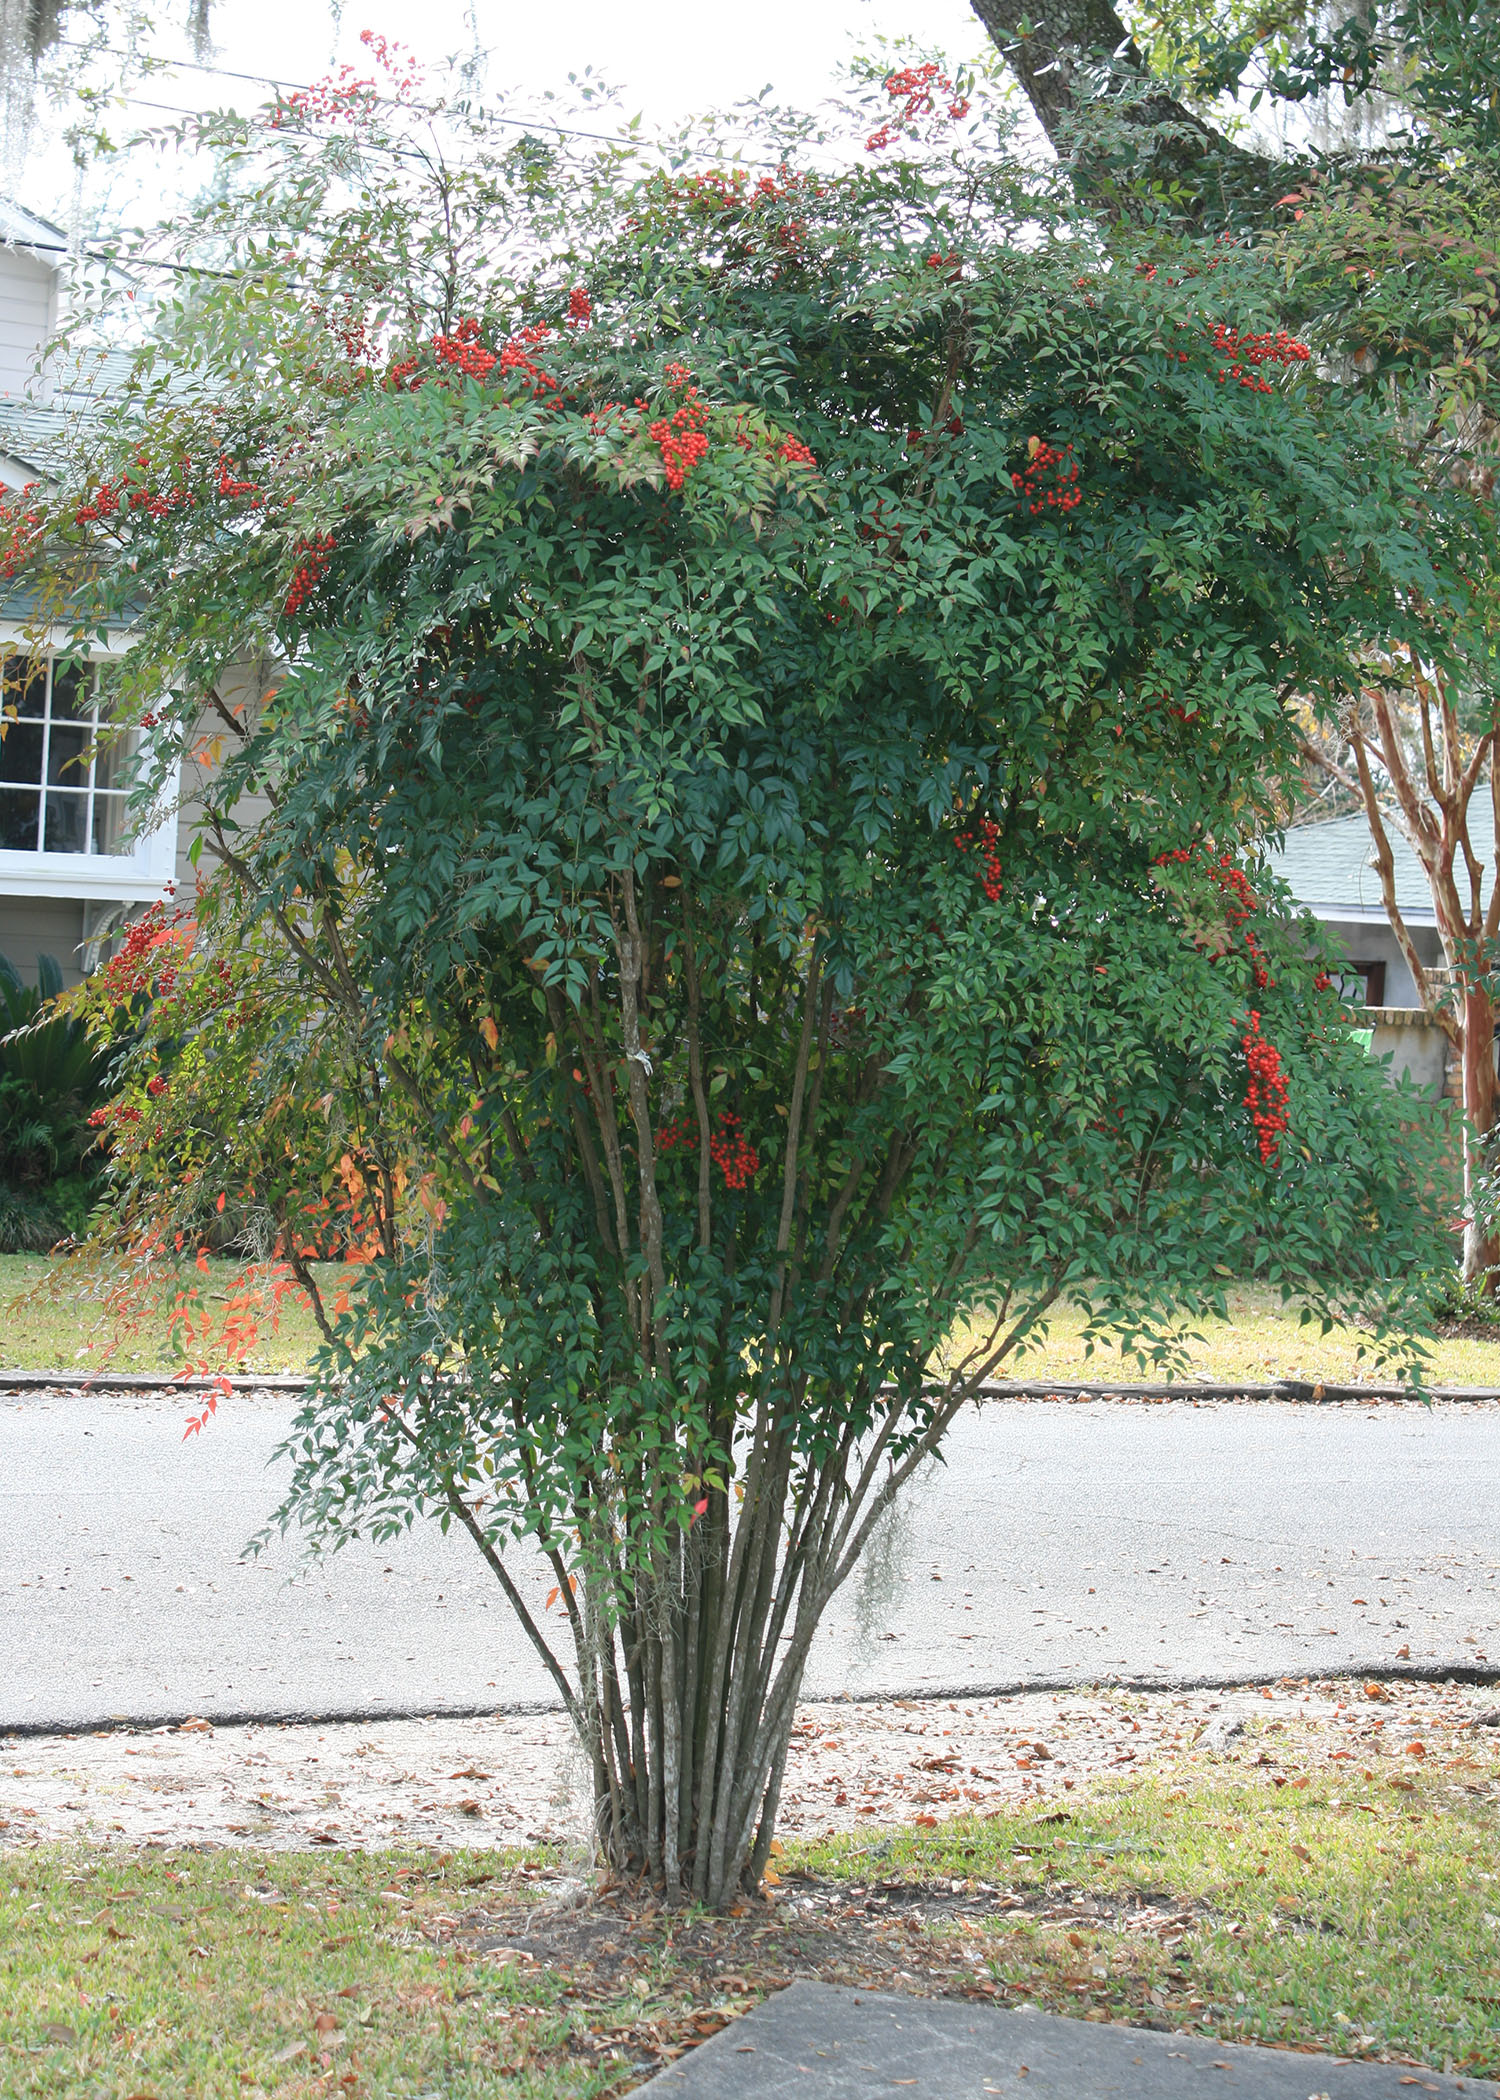 Nandina domestica can grow up to 8 feet tall and makes an excellent specimen plant in a landscape. (Photo by MSU Extension/Gary Bachman)